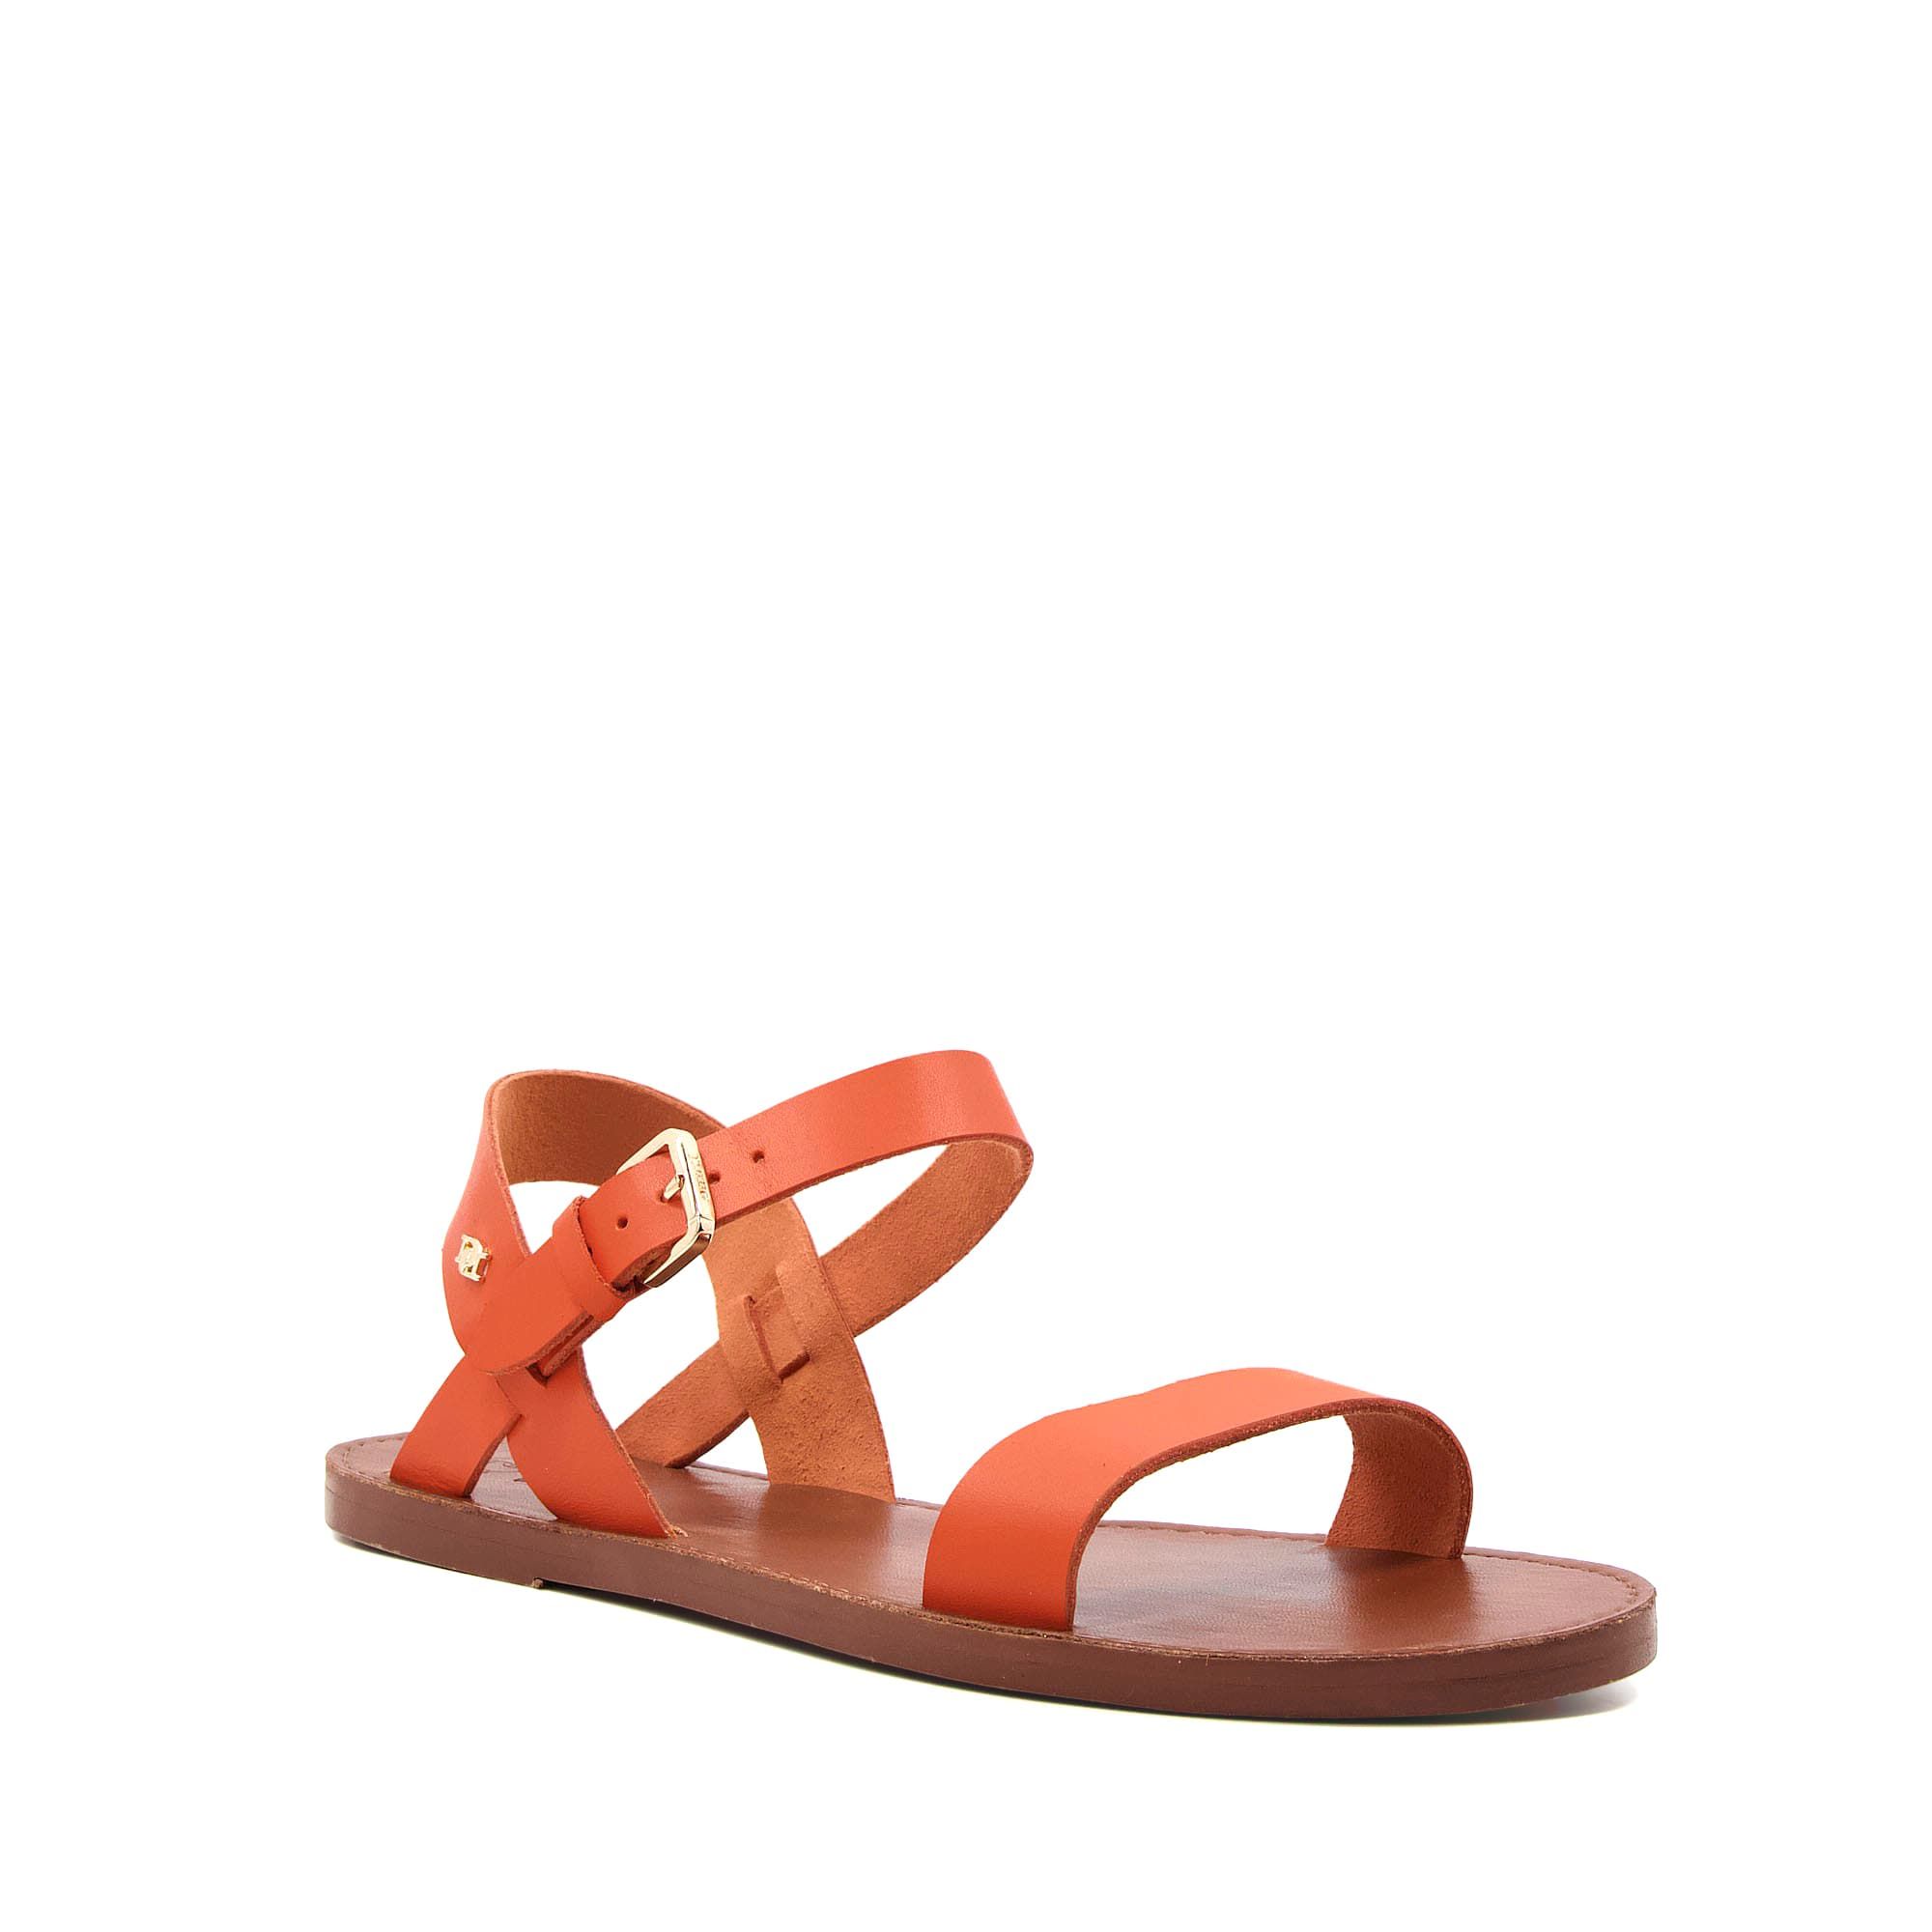 Far-flung escapes call for paired back summer sandals. Crafted from soft leather and featuring an adjustable ankle strap this minimal style will fit seamlessly into your new season wardrobe.